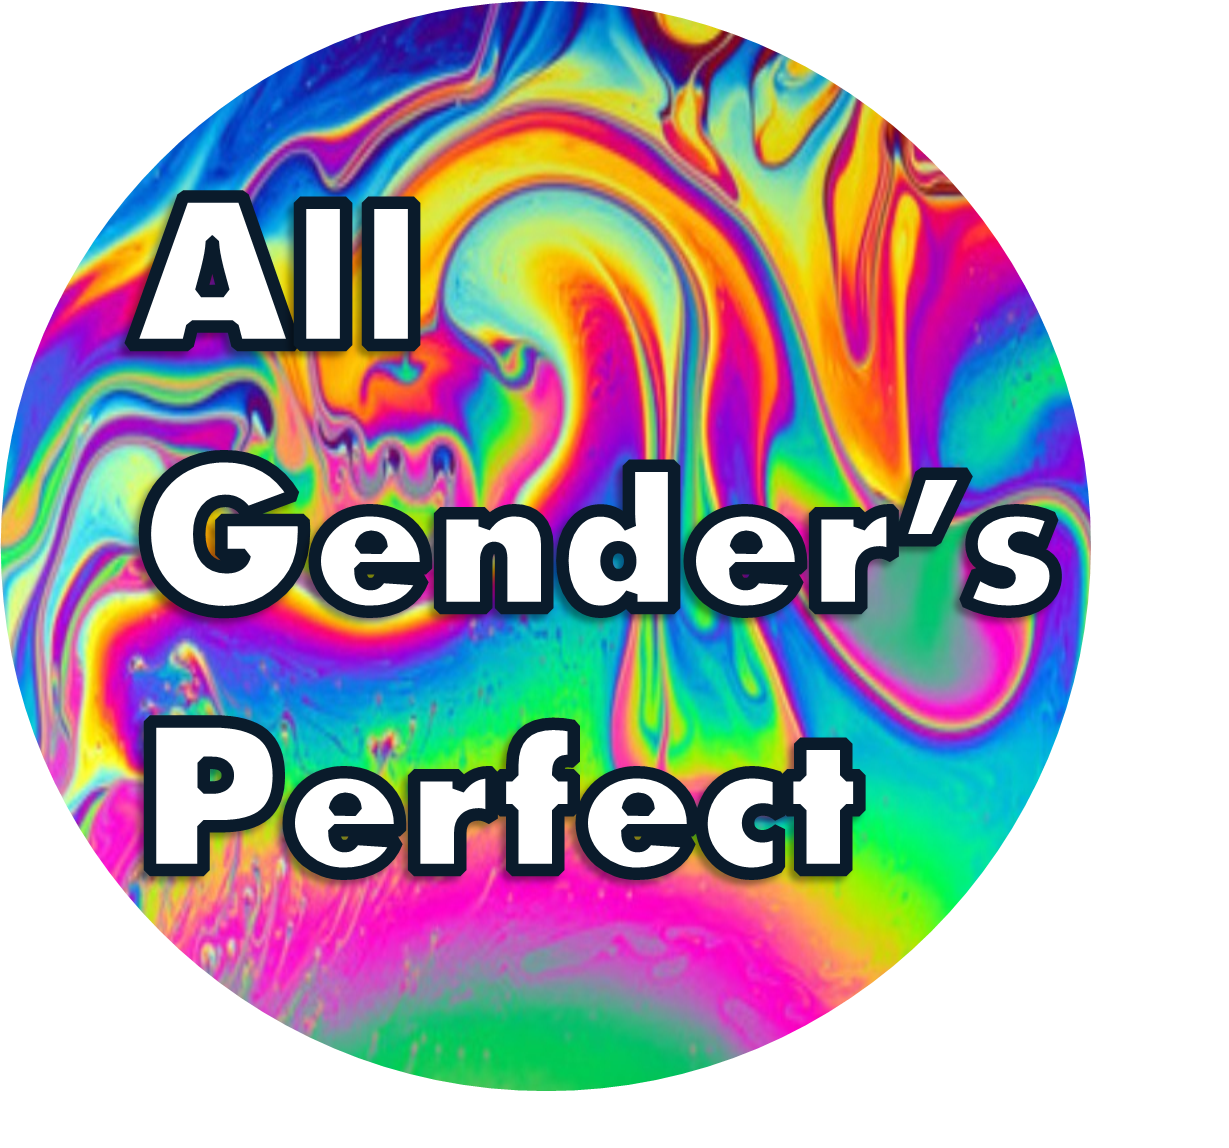 All gender's perfect